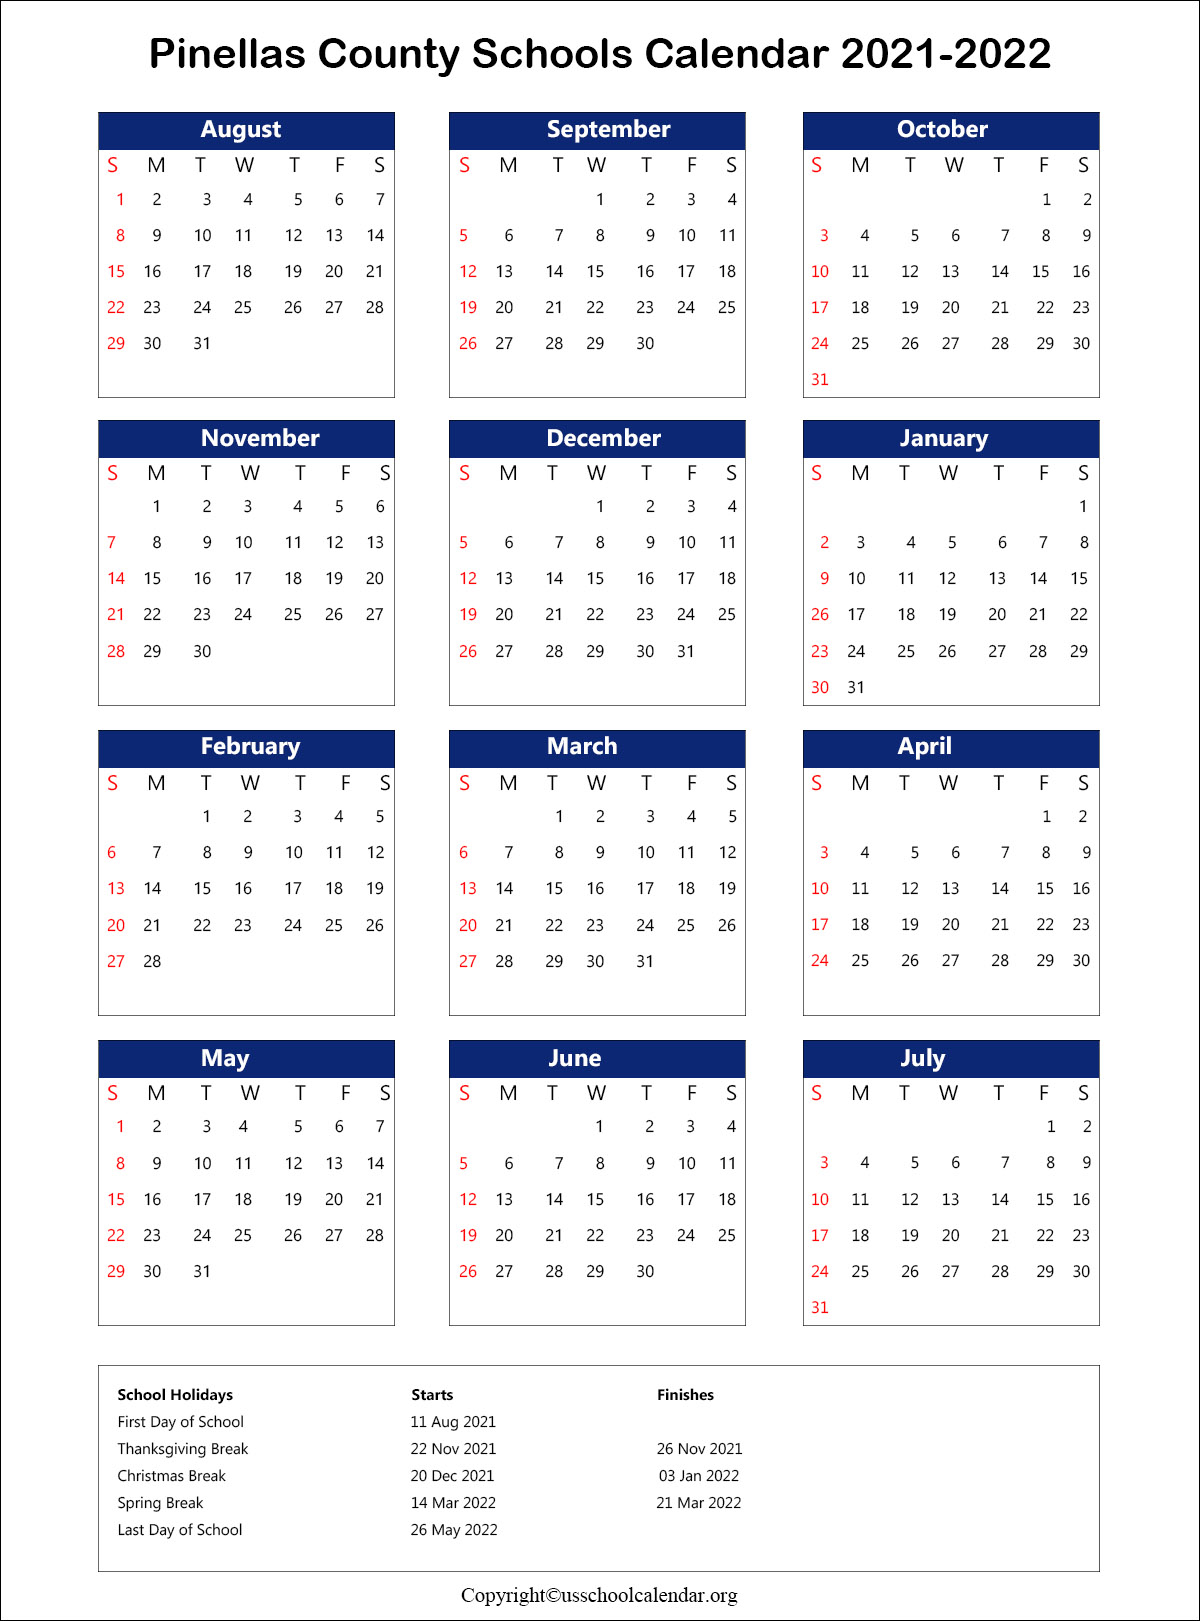 Pinellas County School Calendar with Holidays 2021 2022